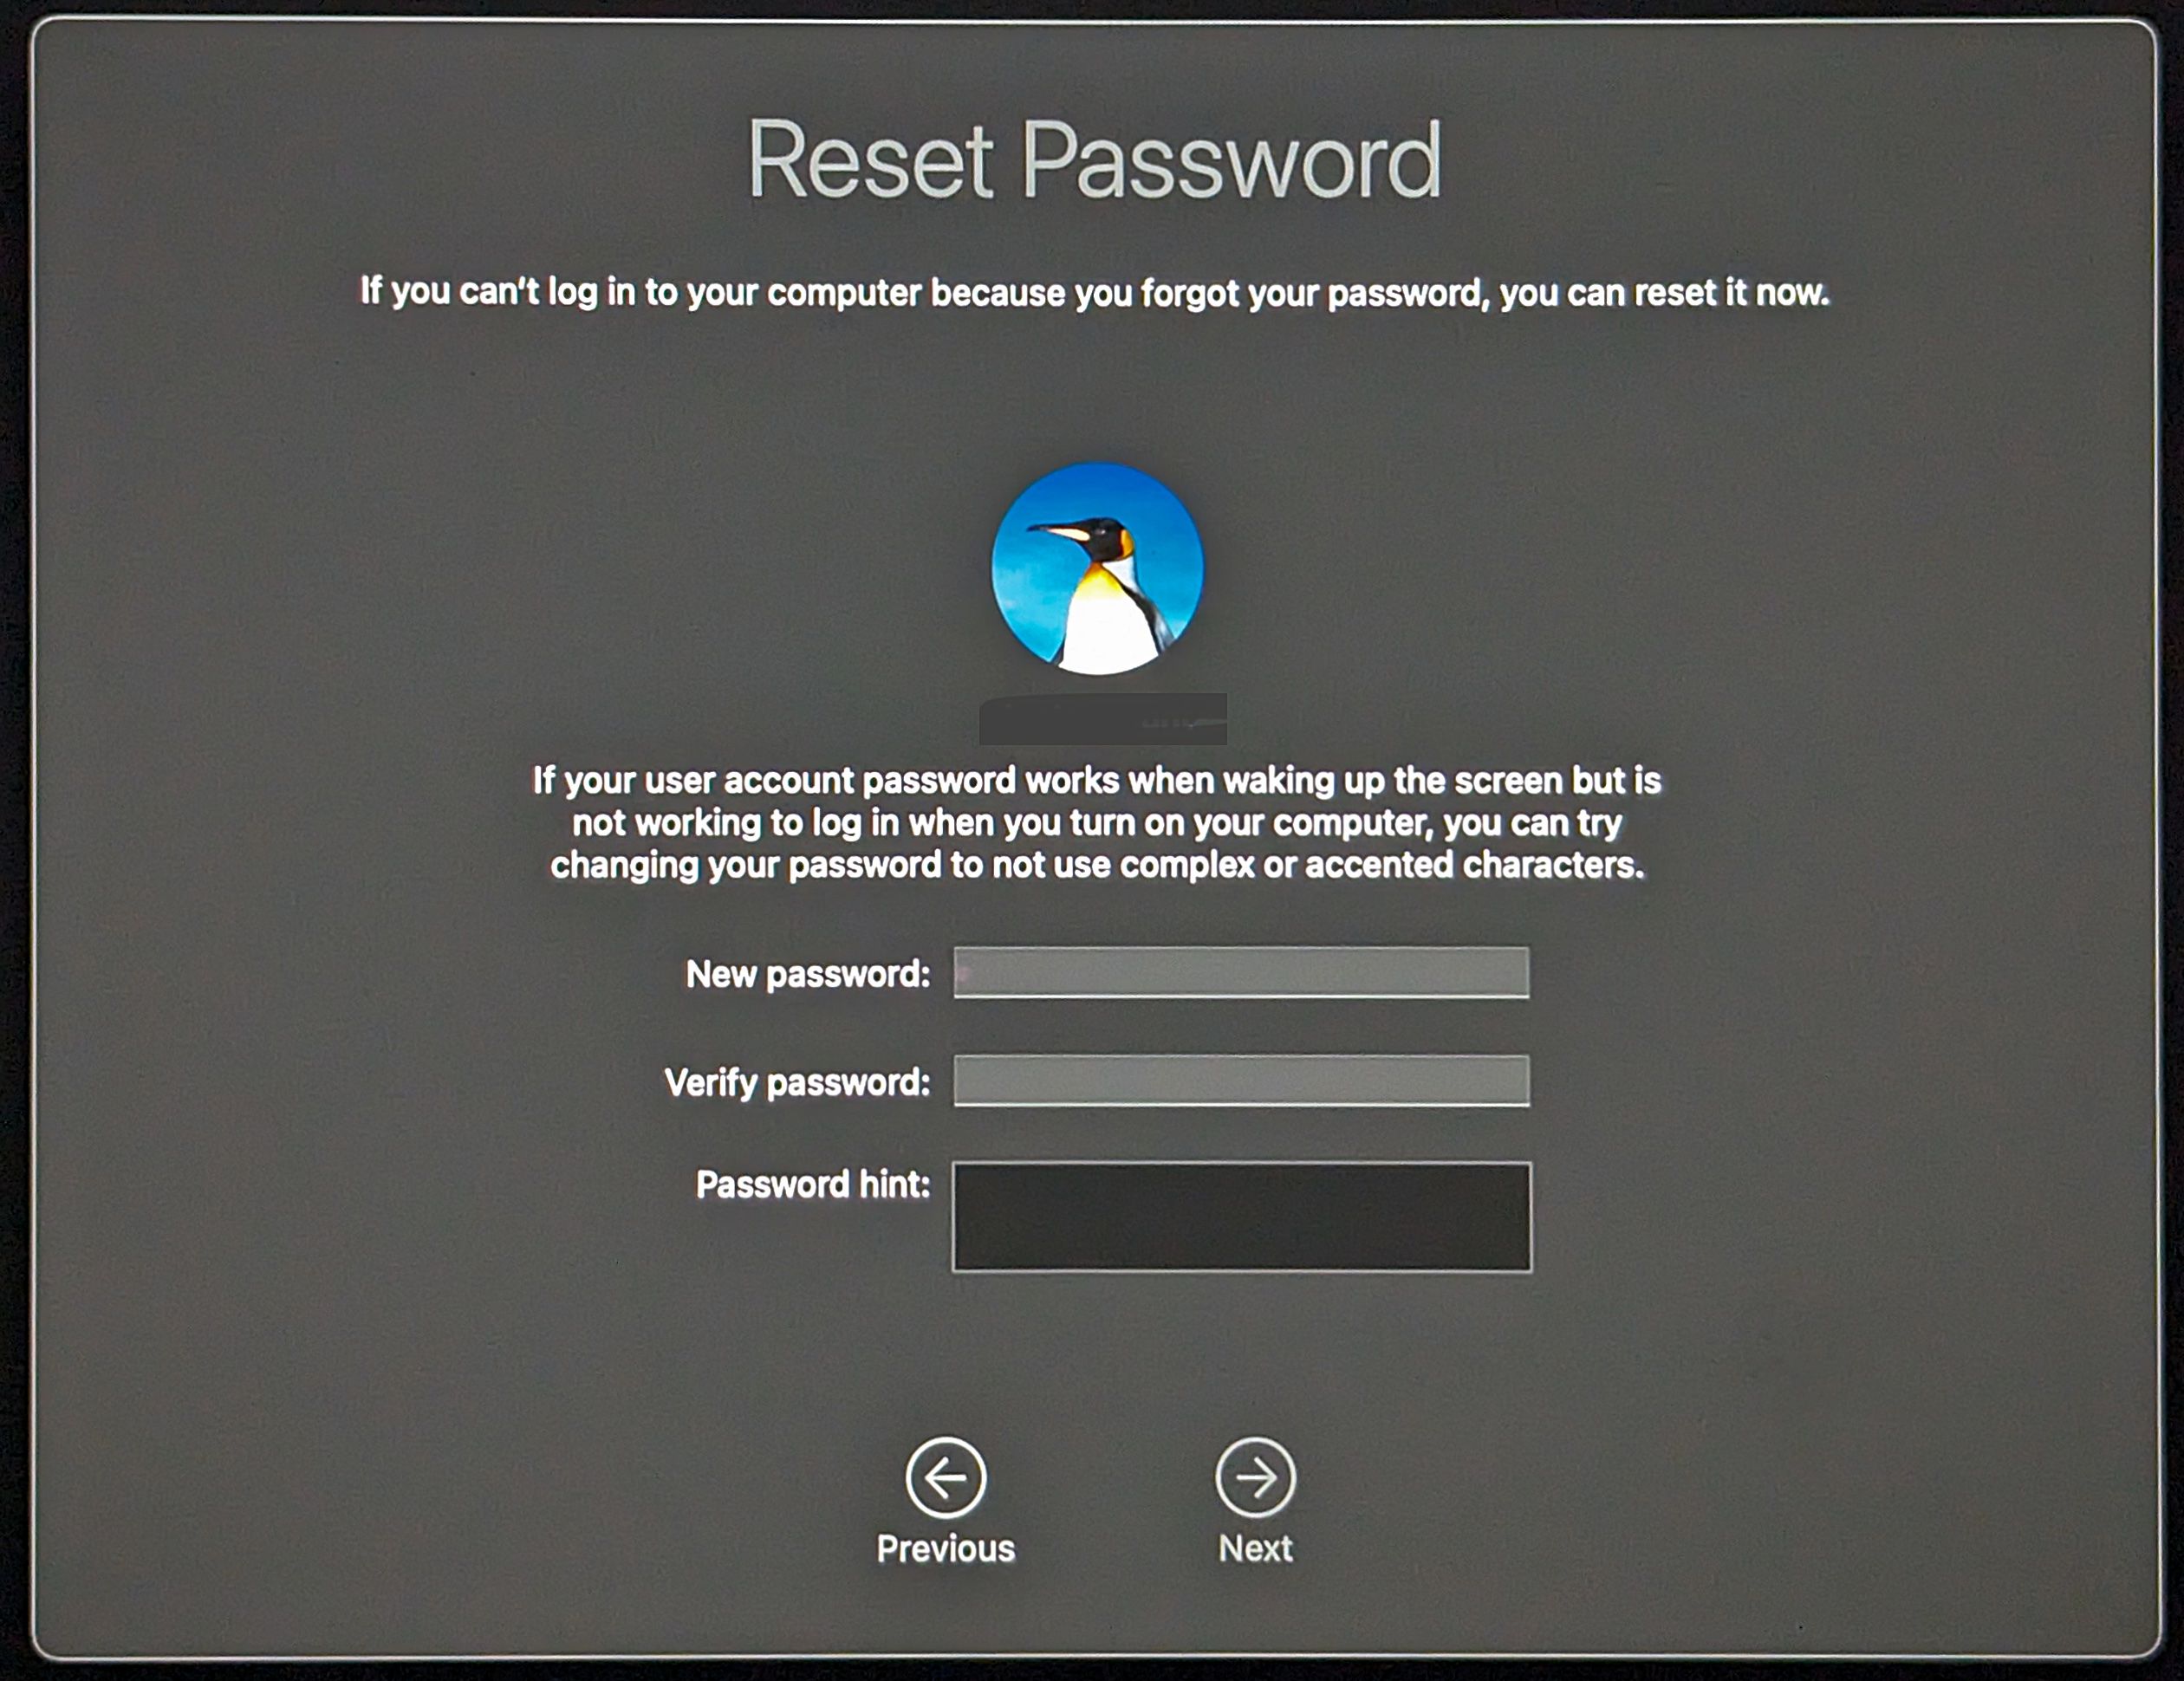 The screen to reset the password on macOS.